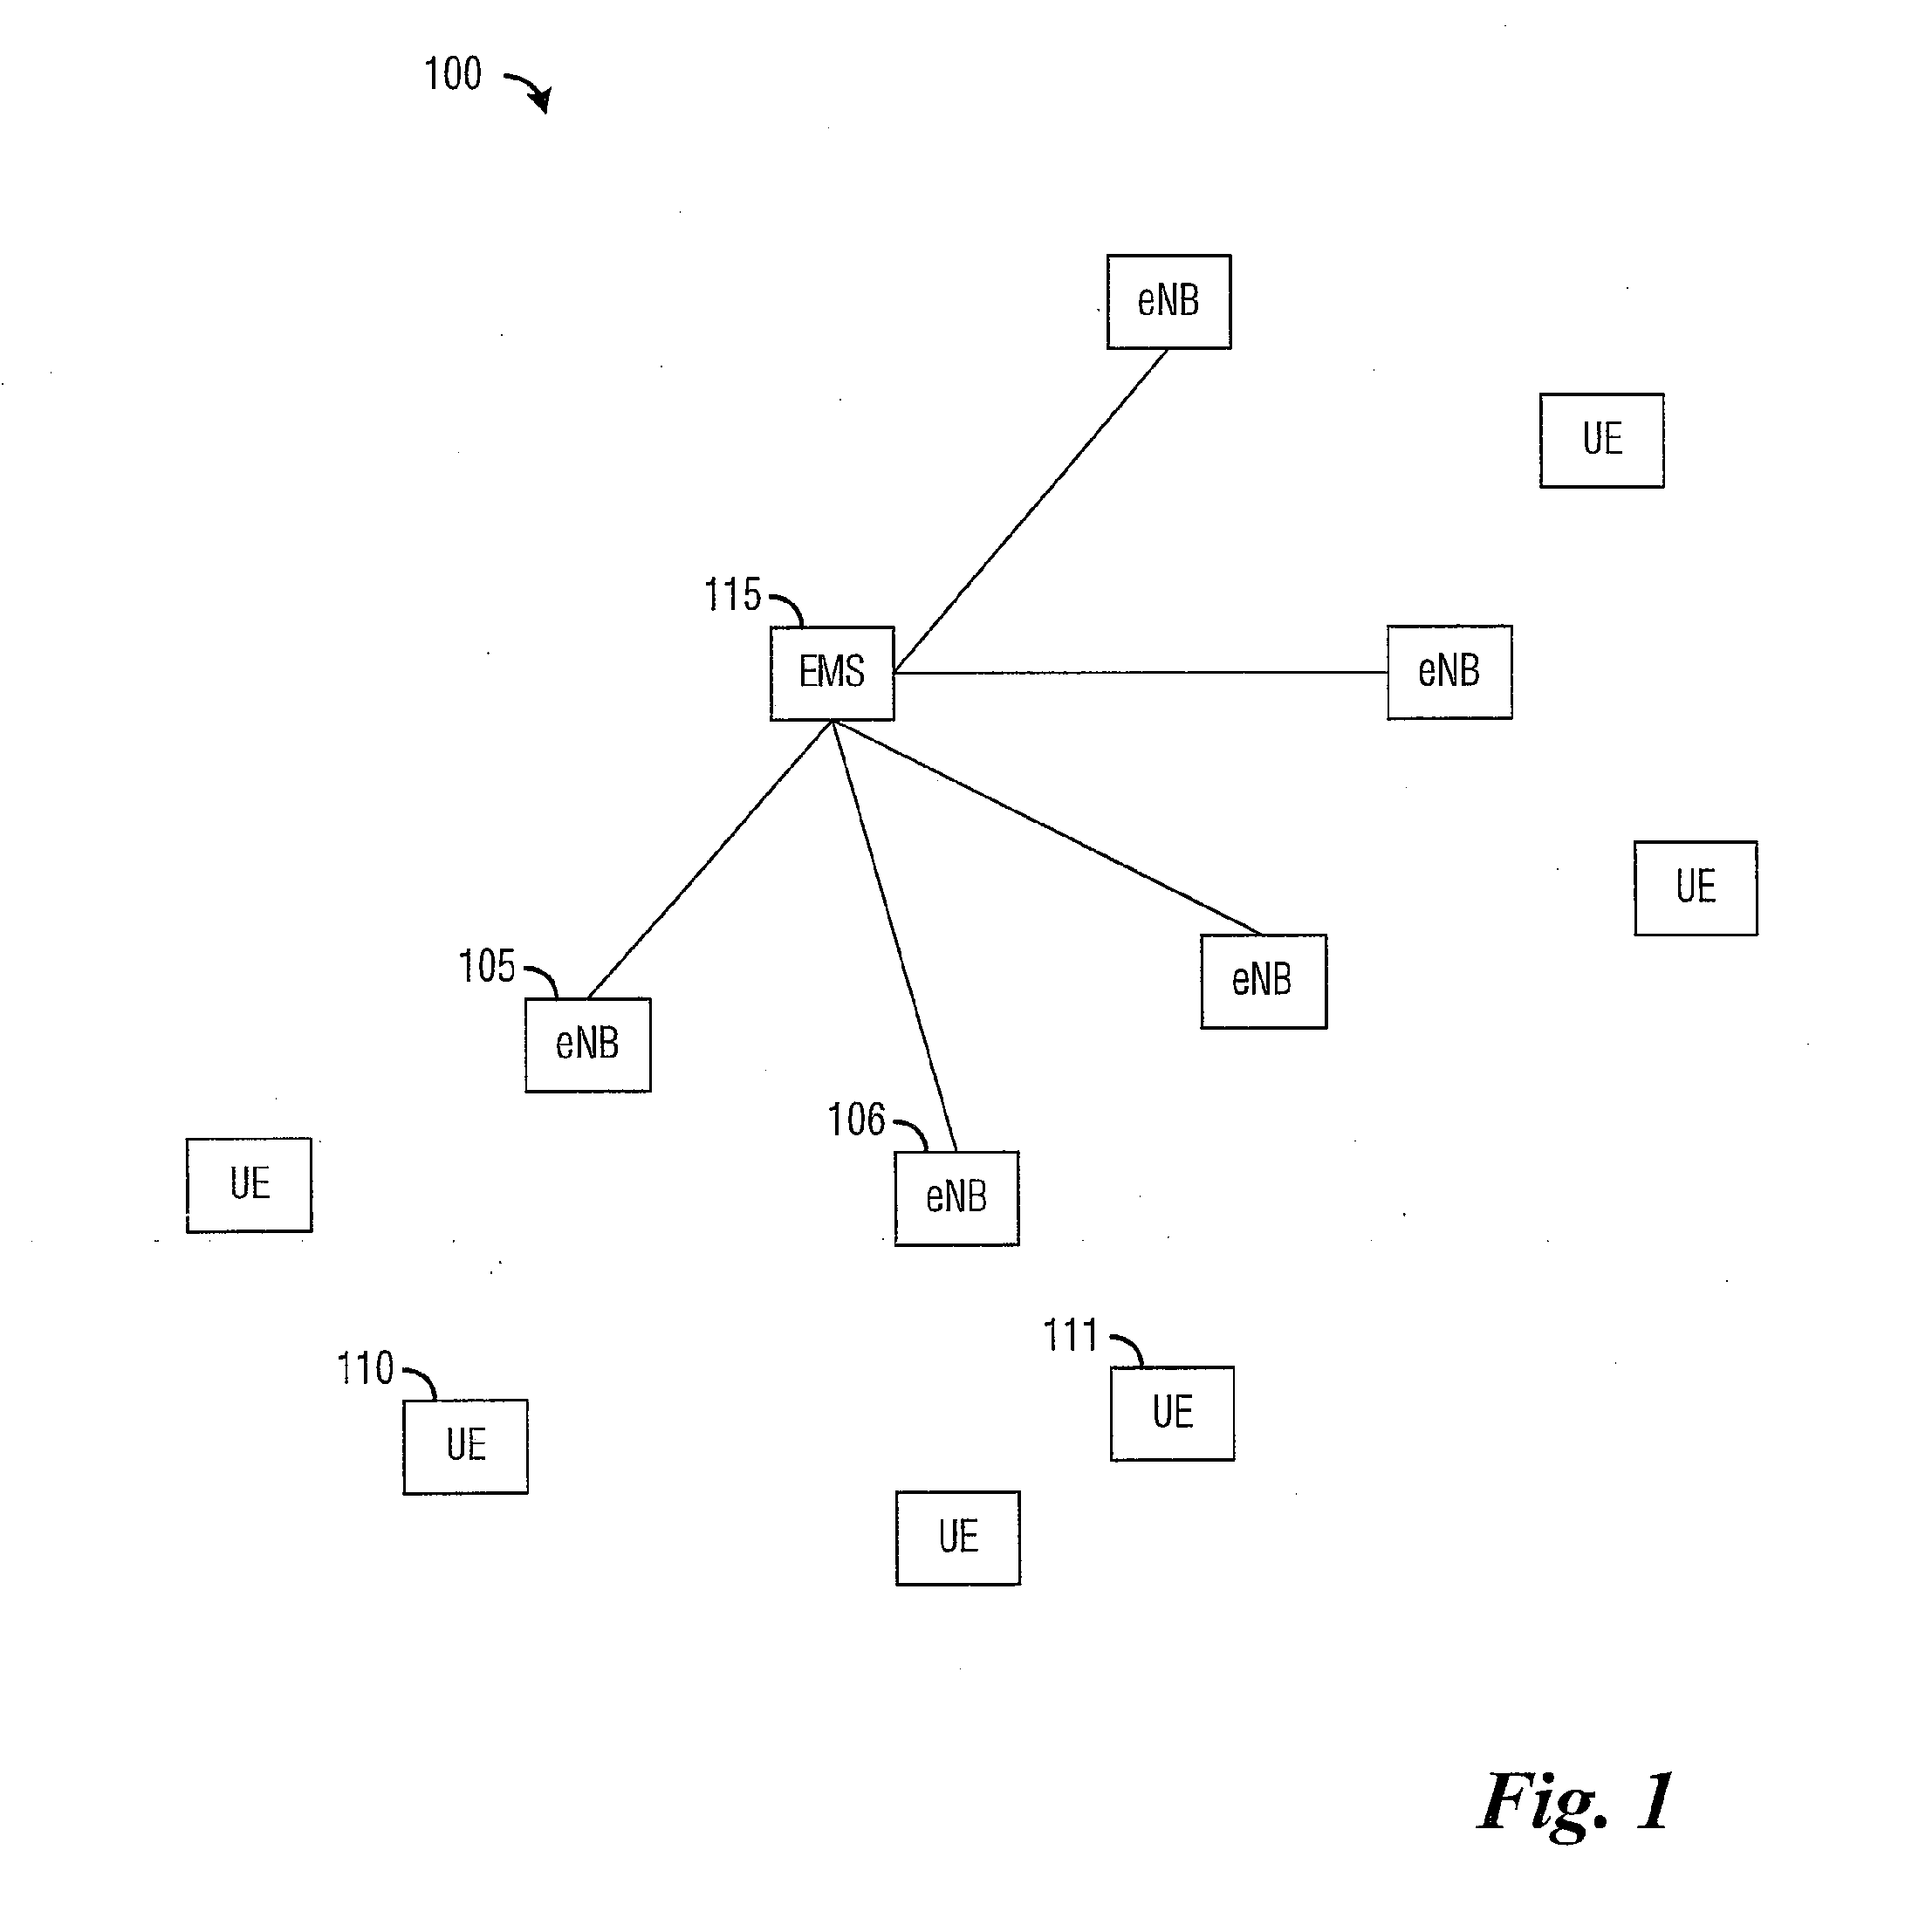 System and Method for Deriving Cell Global Identity Information